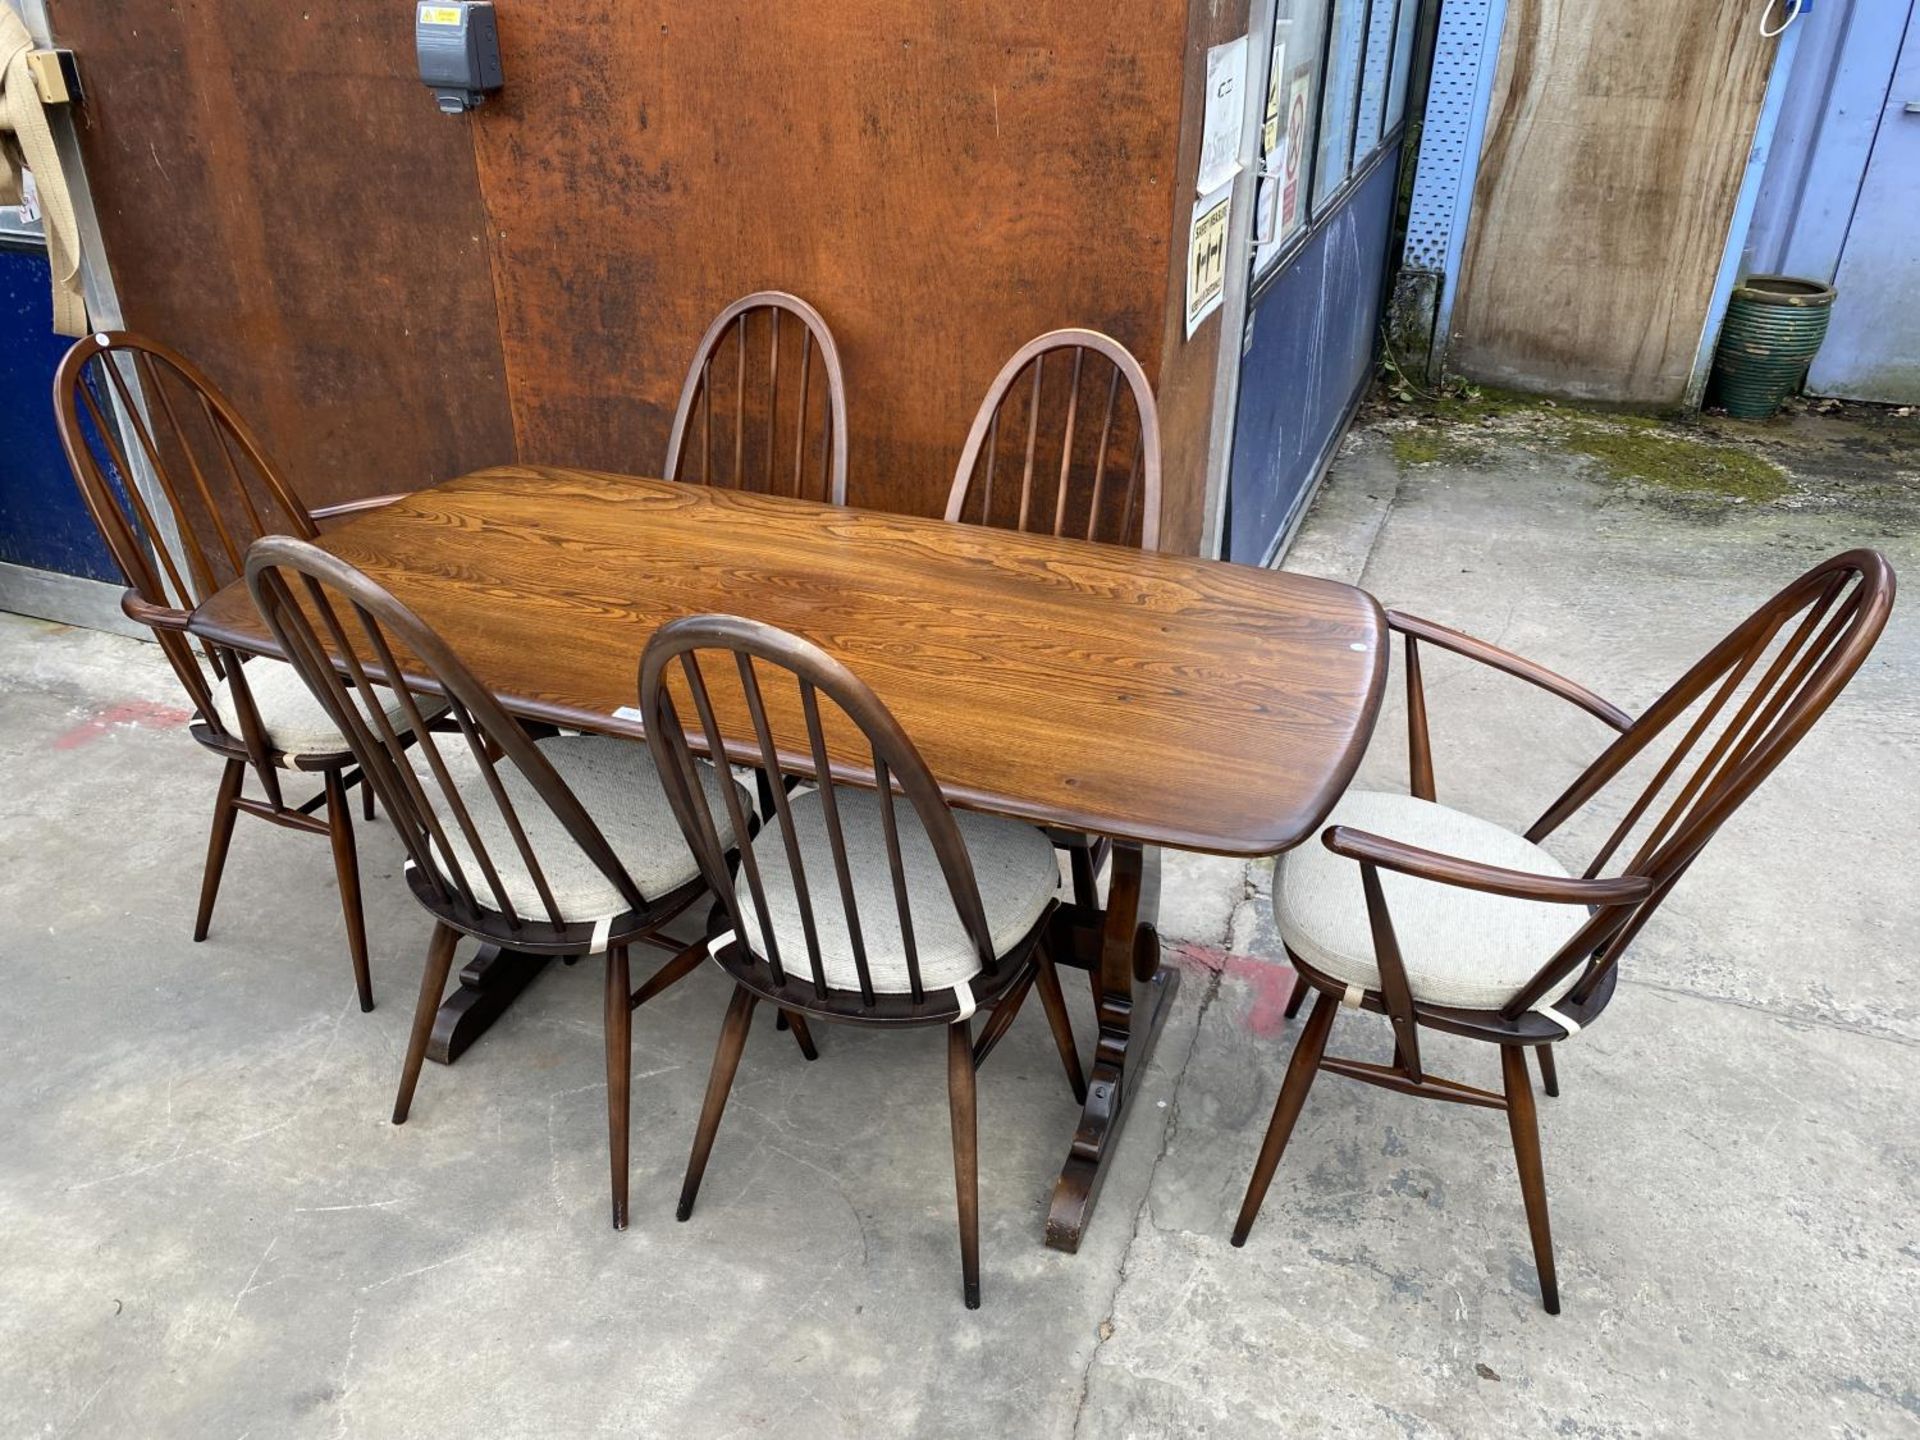 AN ERCOL BLUE LABEL ELM AND BEECH REFECTORY STYLE DINING TABLE, 60" X 30" AND SIX QUAKER DINING